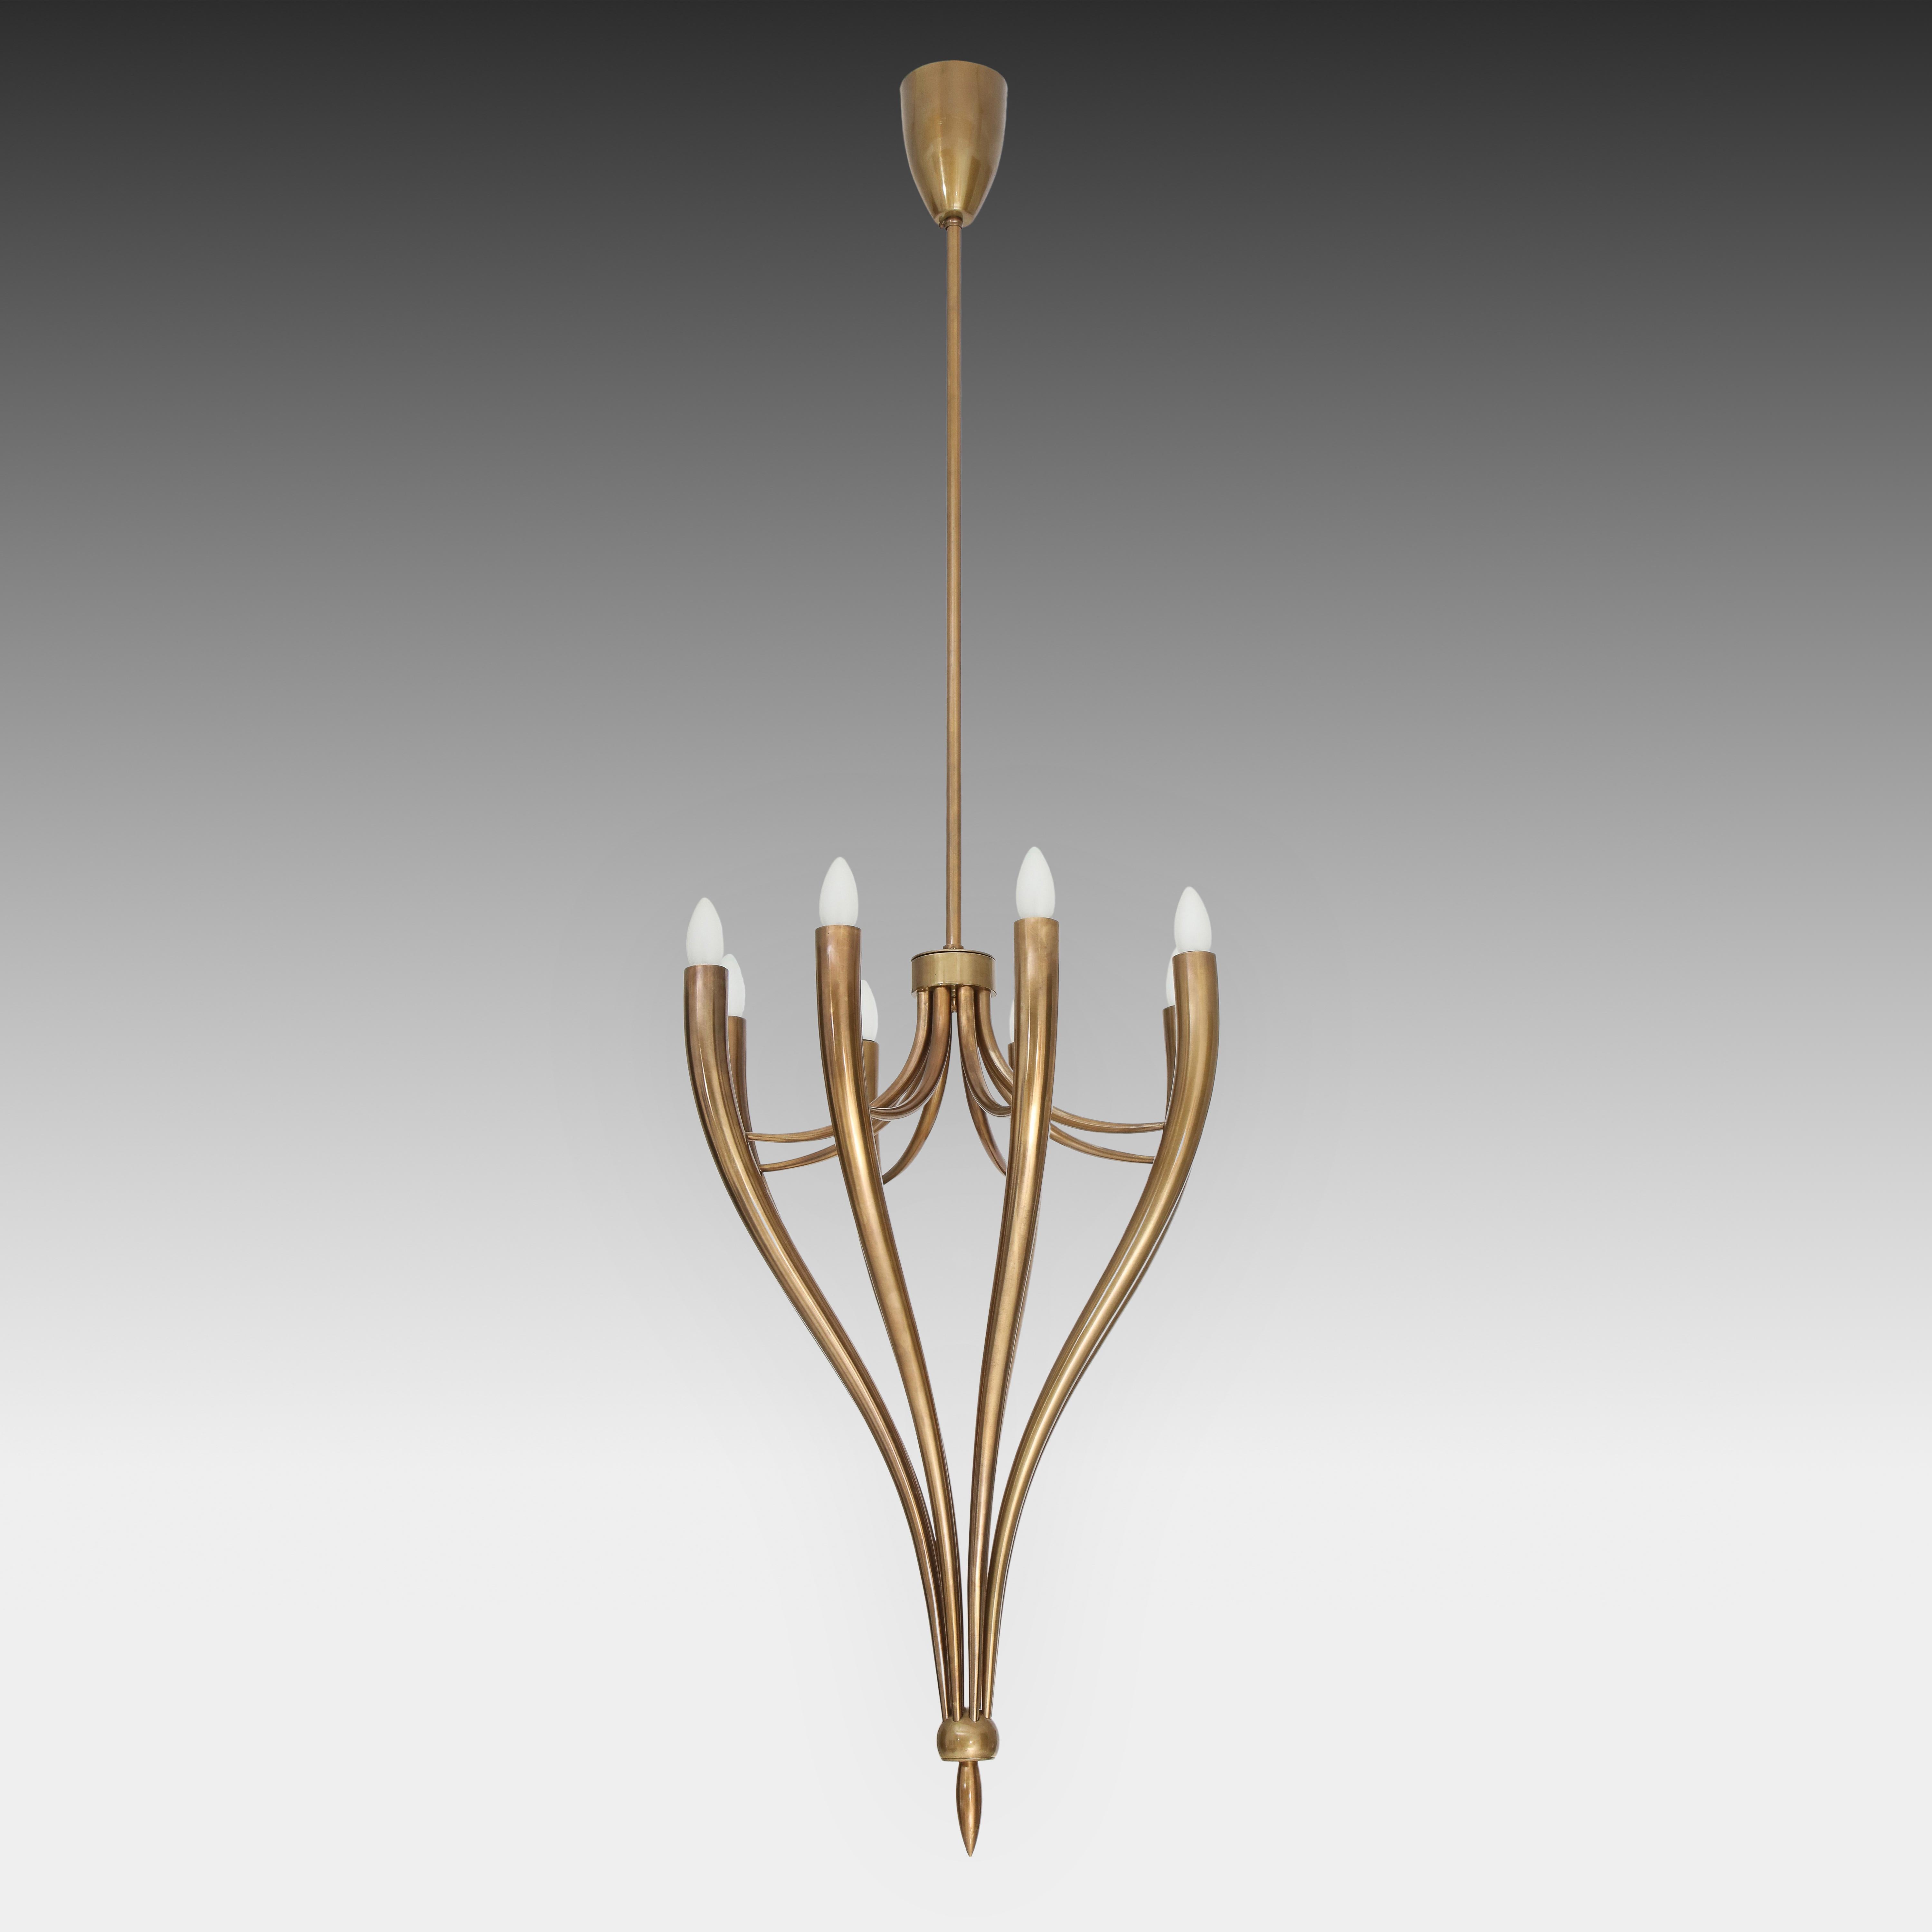 Guglielmo Ulrich rare and elegant brass chandelier with eight cascading arms ending on a brass point detail, Italy, 1940s. This stunning period chandelier makes a statement lighting piece with its large scale and sweeping curves. It is classical in